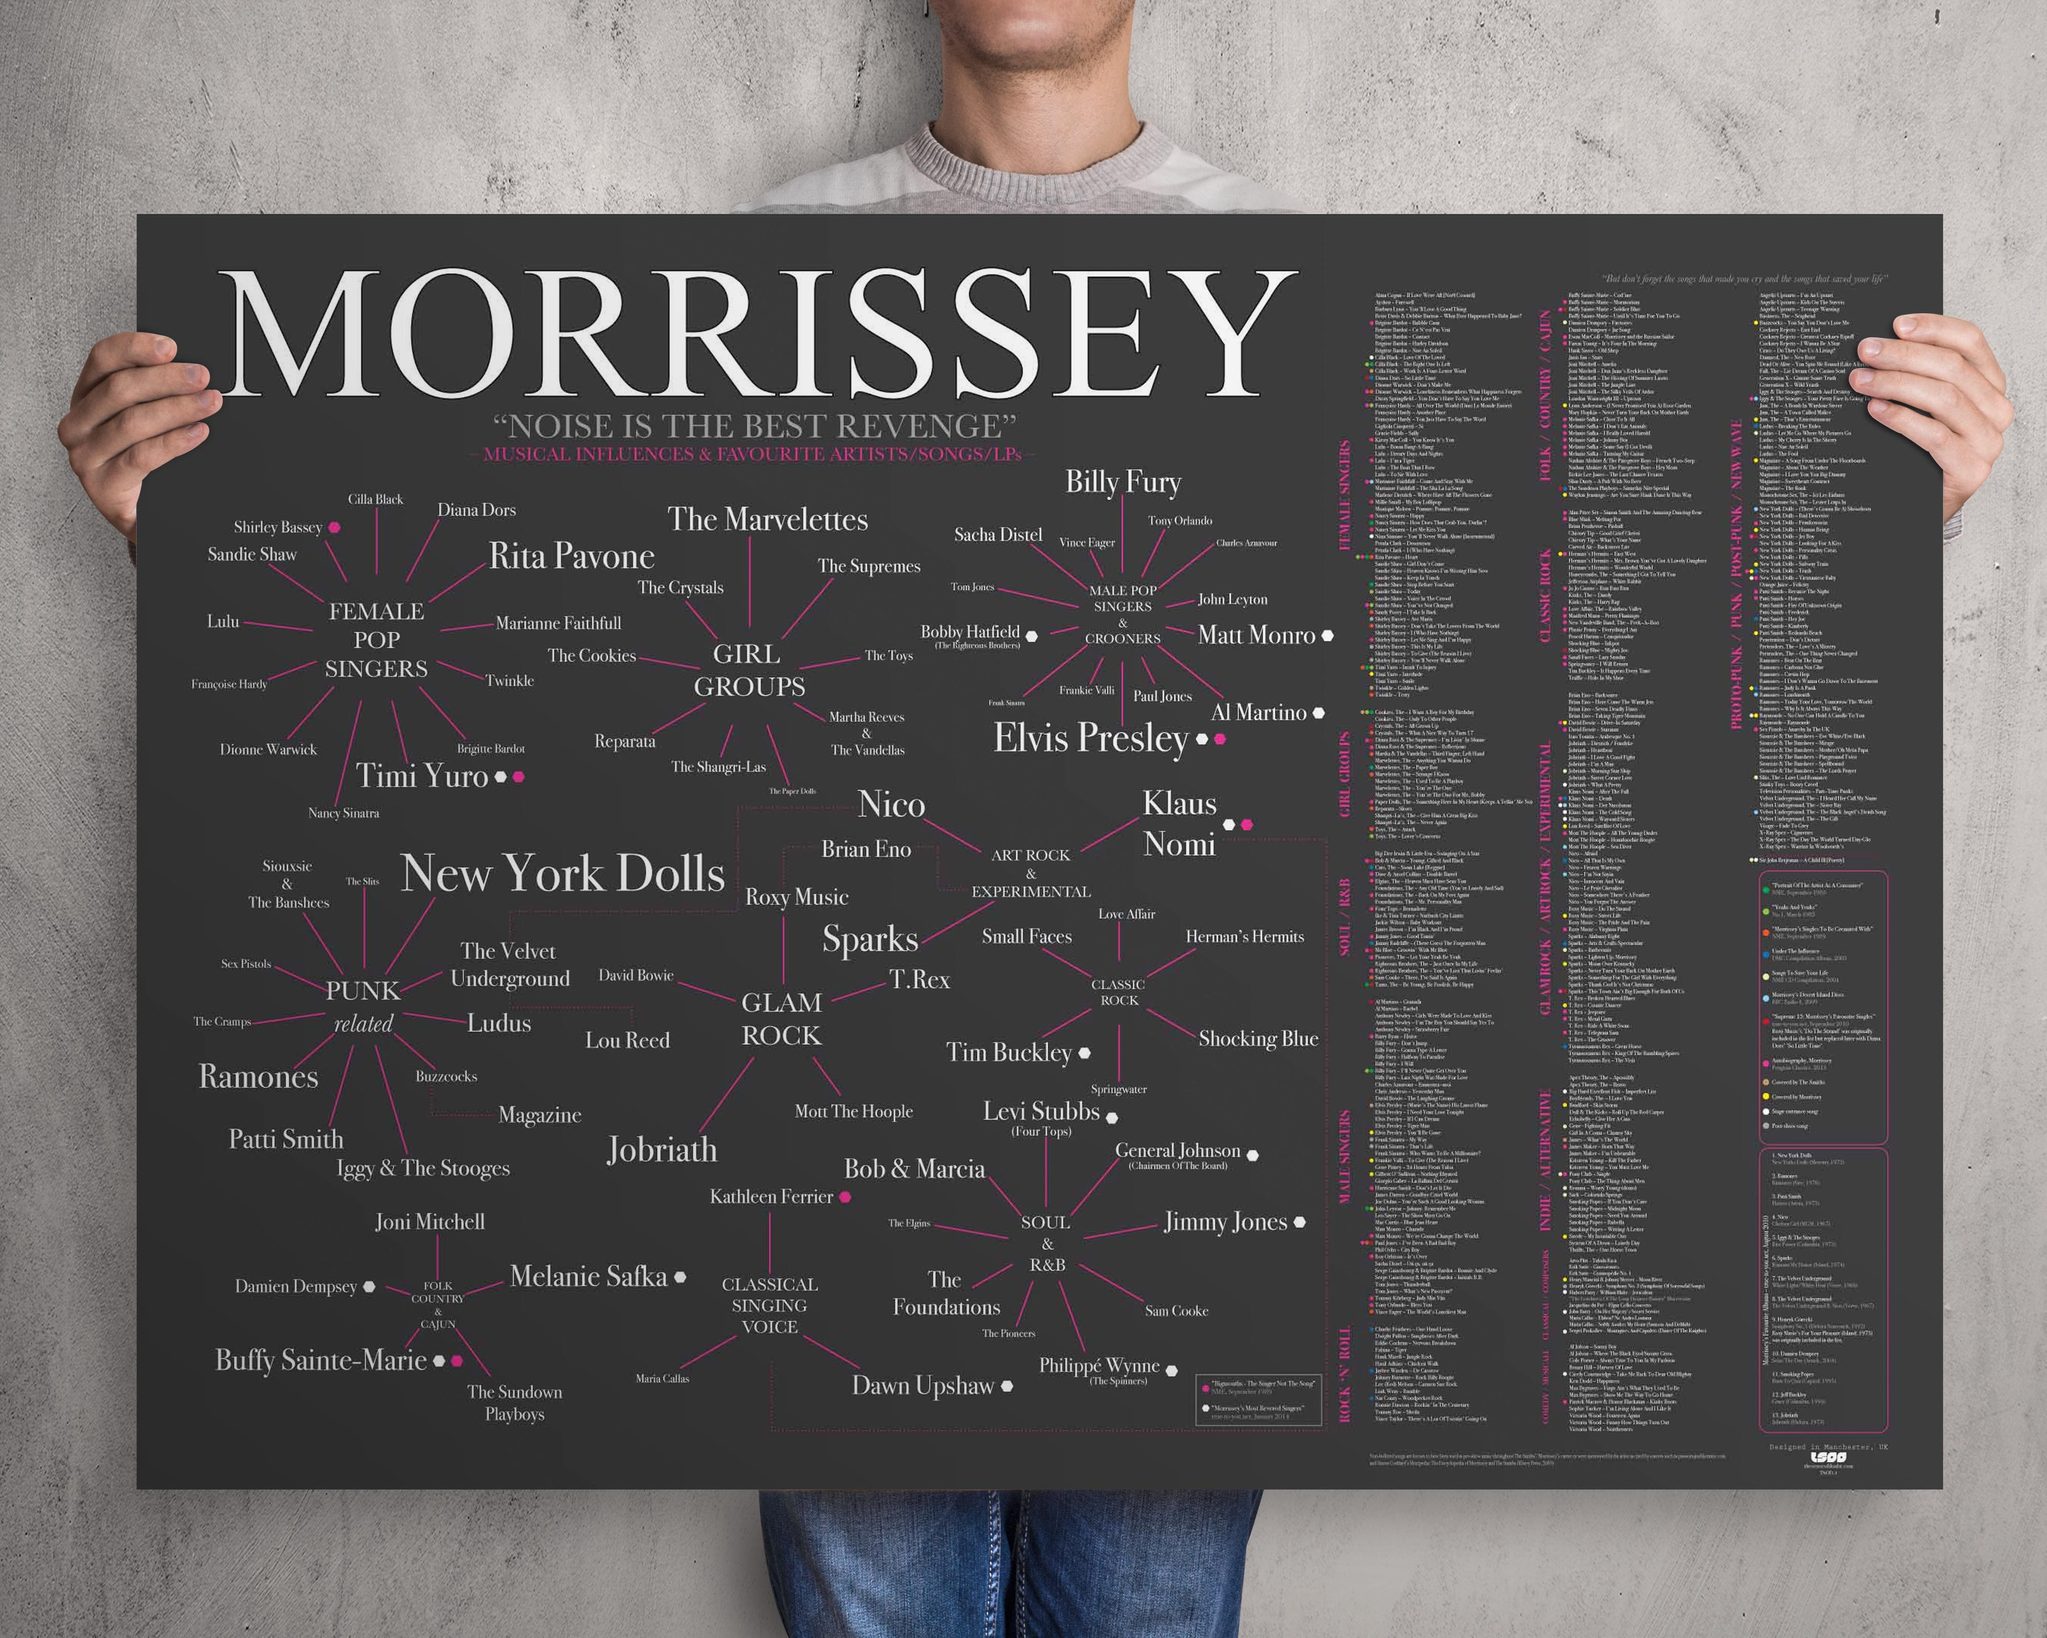 Morrissey - Musical Influences [Full Edition]